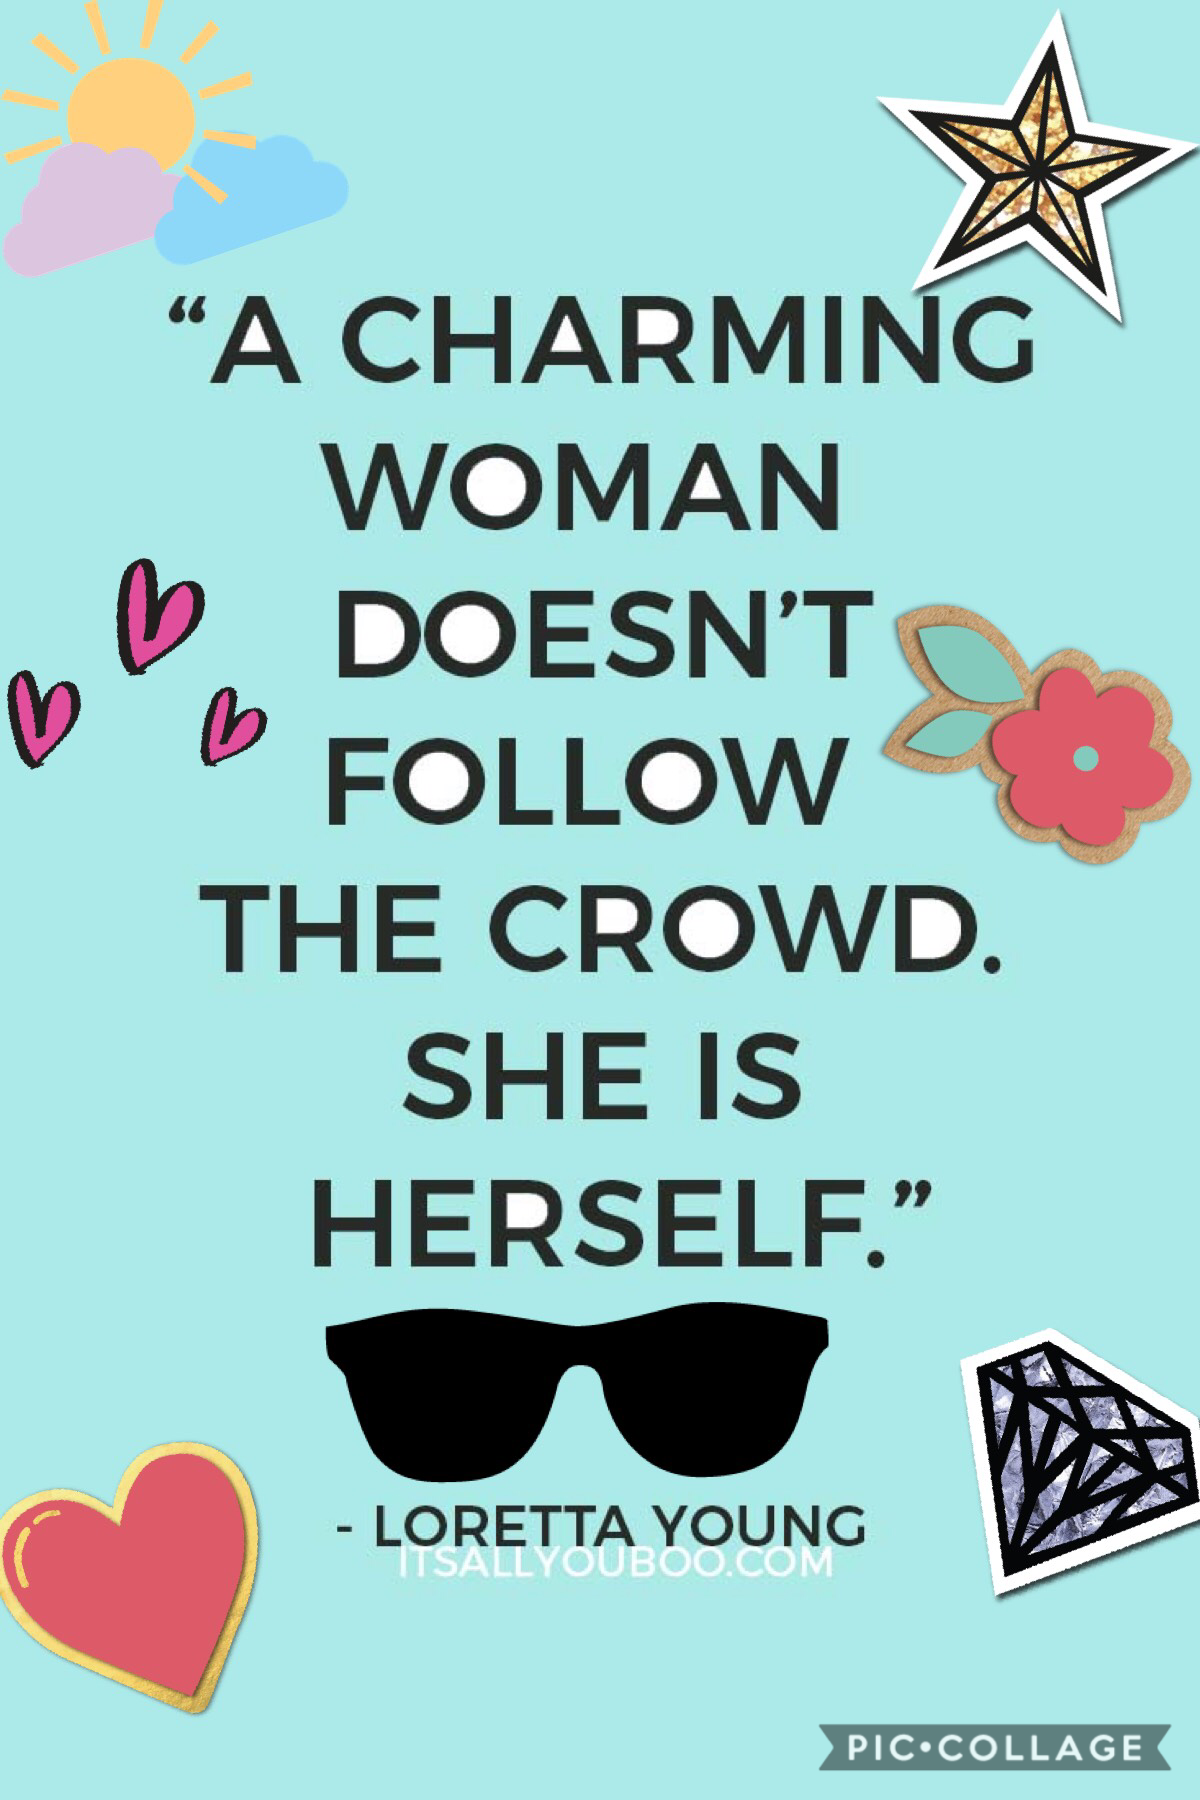 This is a woman’s day quote this is one of my favorite quotes. I hope all the woman and girls out there and see this and life out this quote
♥-SOPHIA